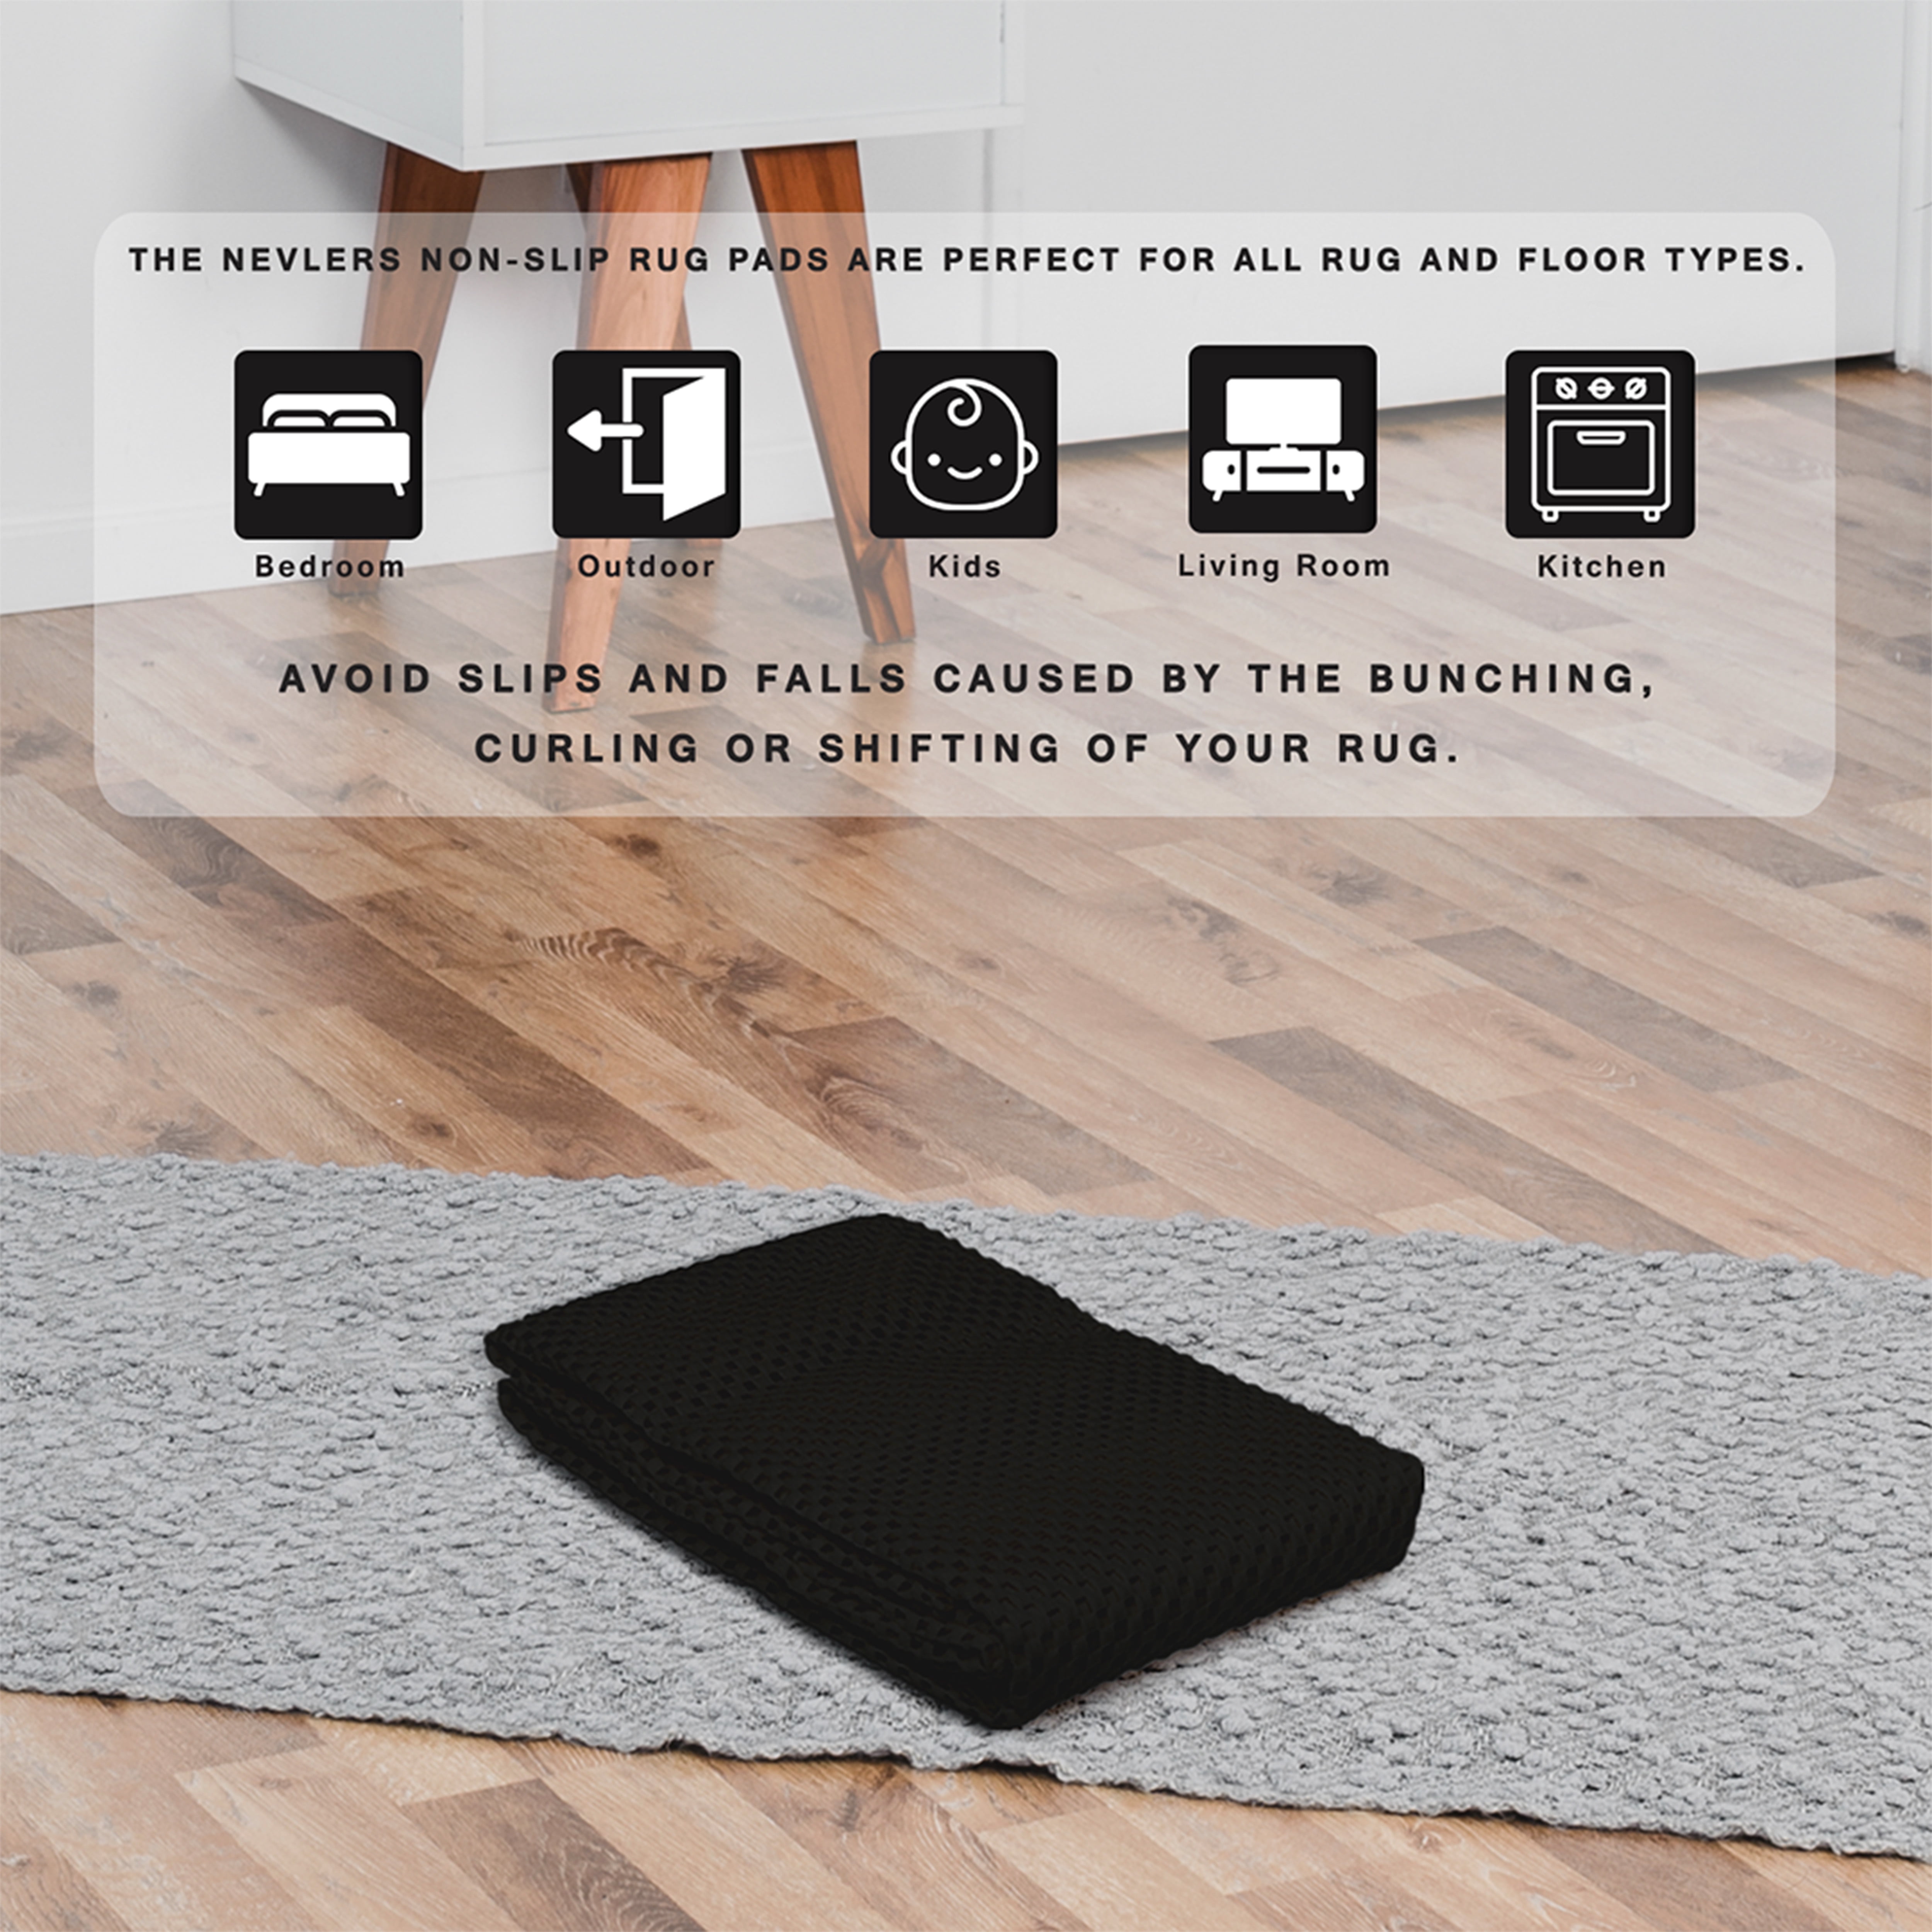 ALLINHOMIE Ultra Premium 5 ft. x 7 ft. Dual Surface Non-Slip Rug Pad WF-RP- 5x7-10 - The Home Depot